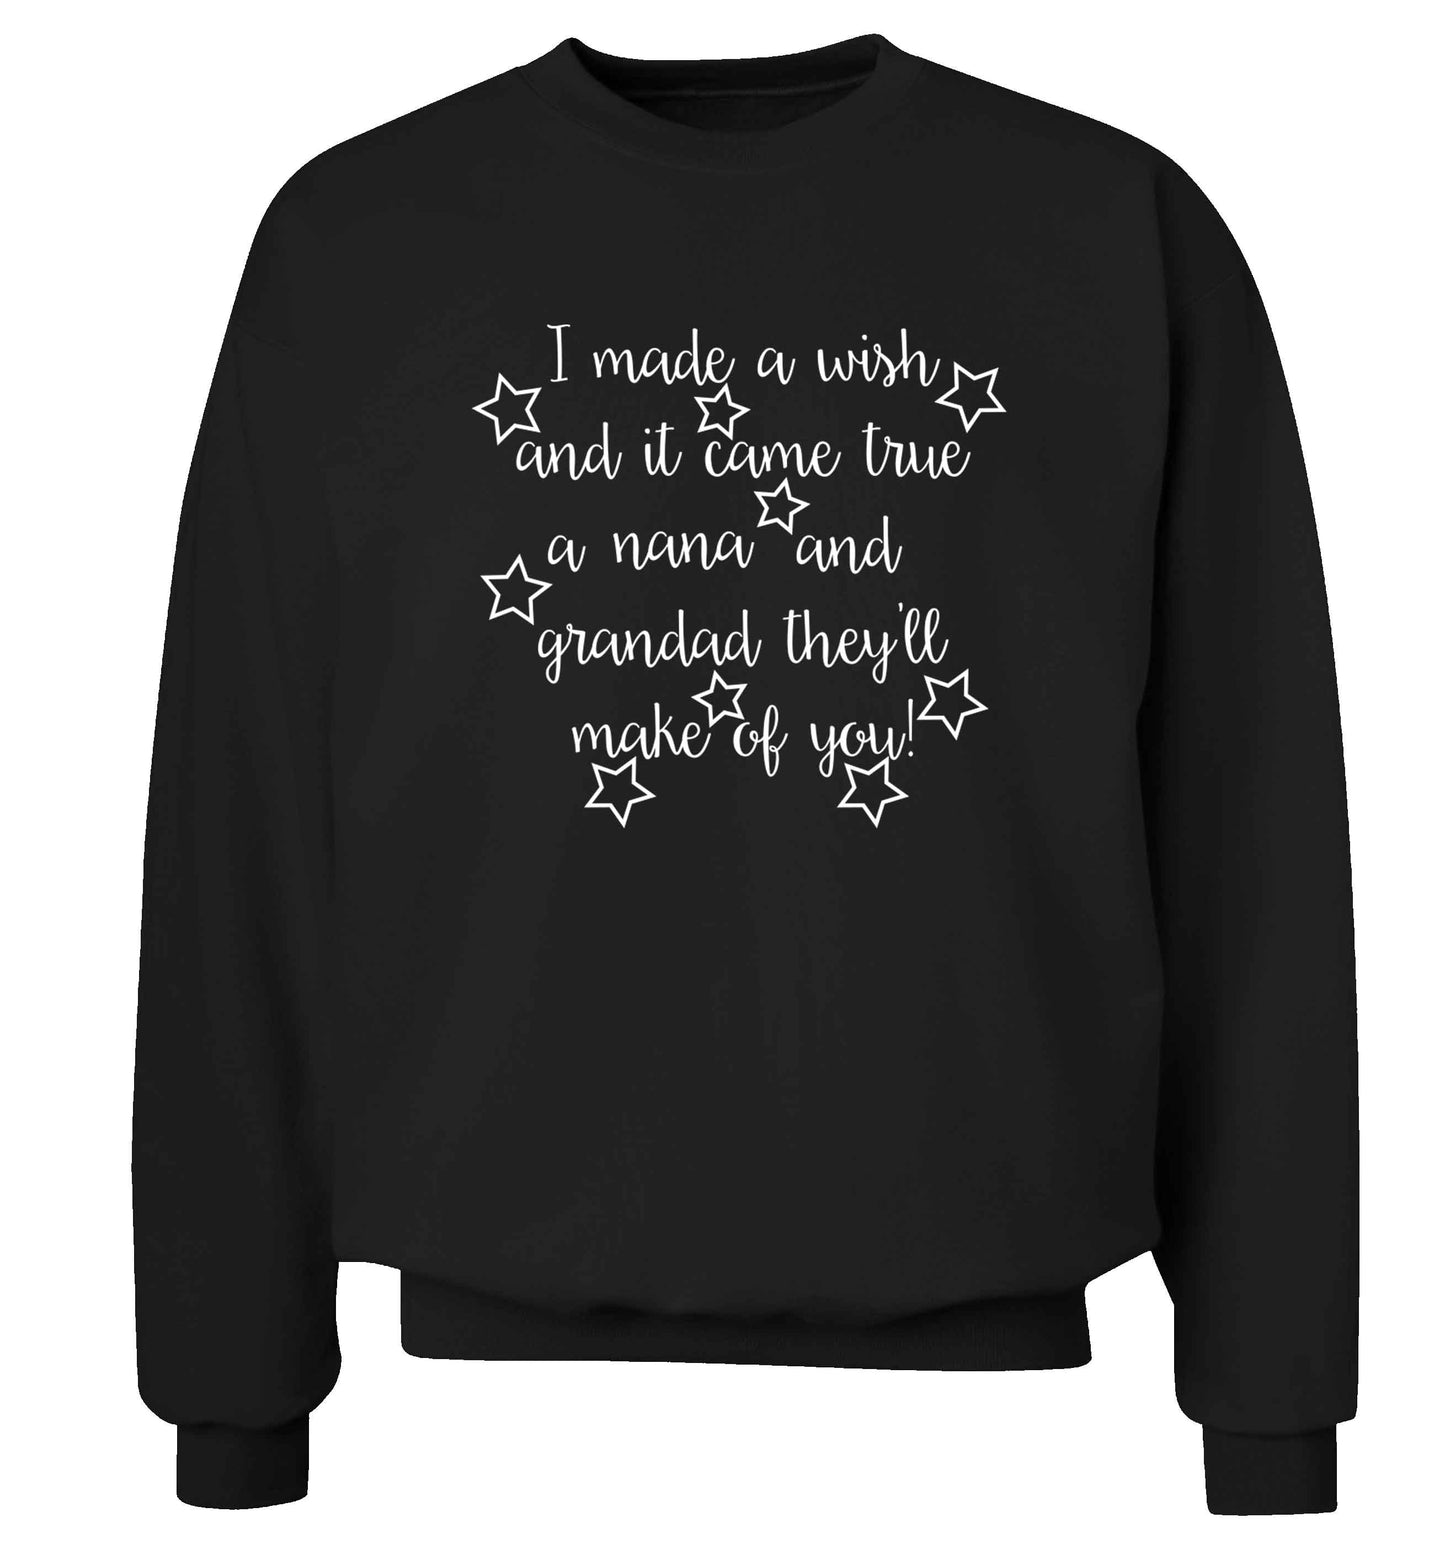 I made a wish and it came true a nana and grandad they'll make of you! Adult's unisex black Sweater 2XL